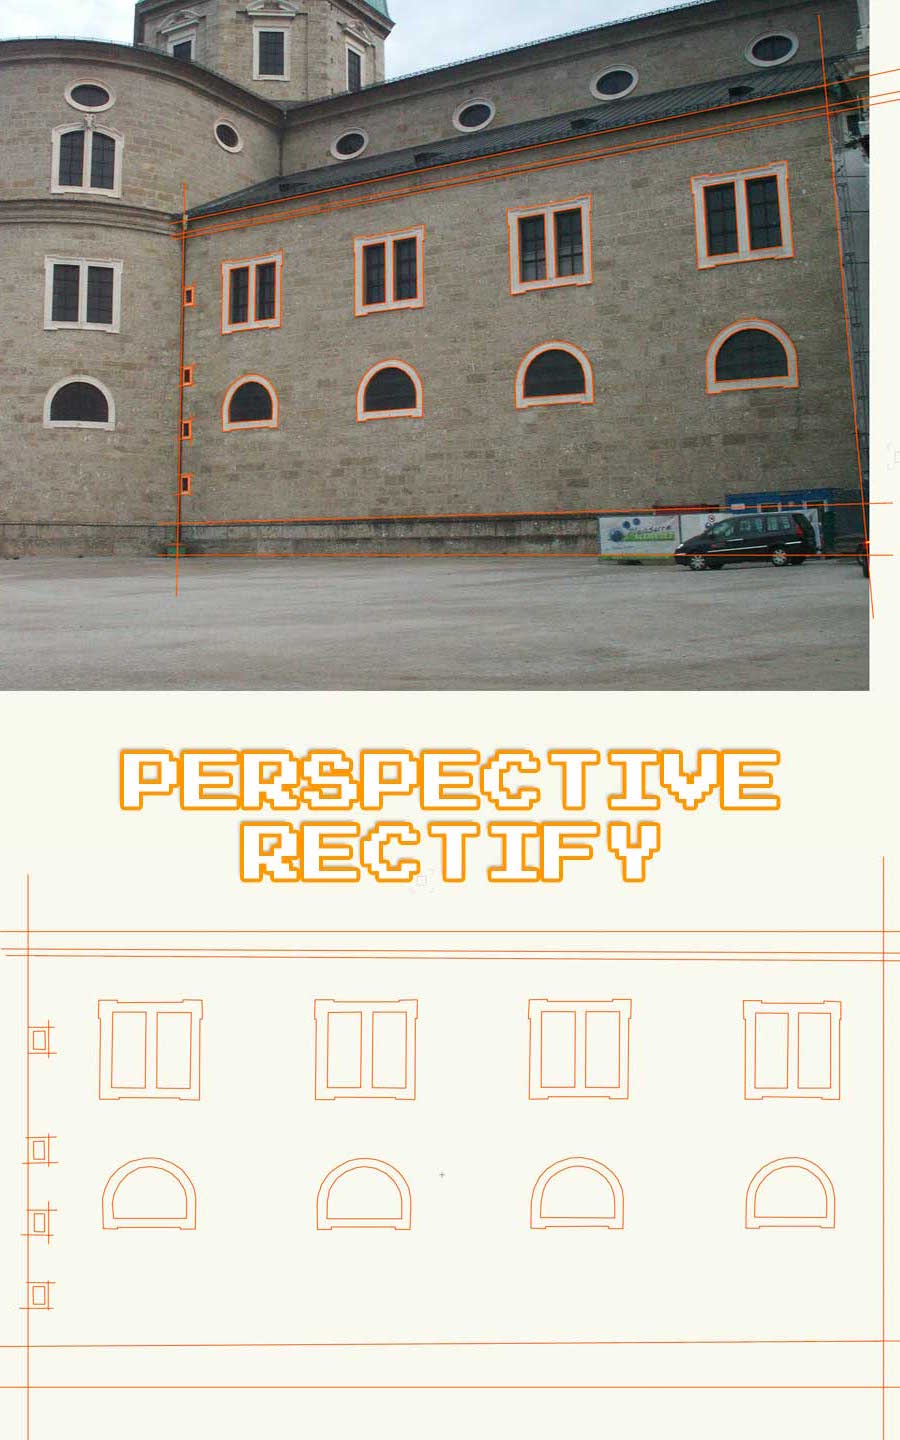 Perspective Rectify info picture